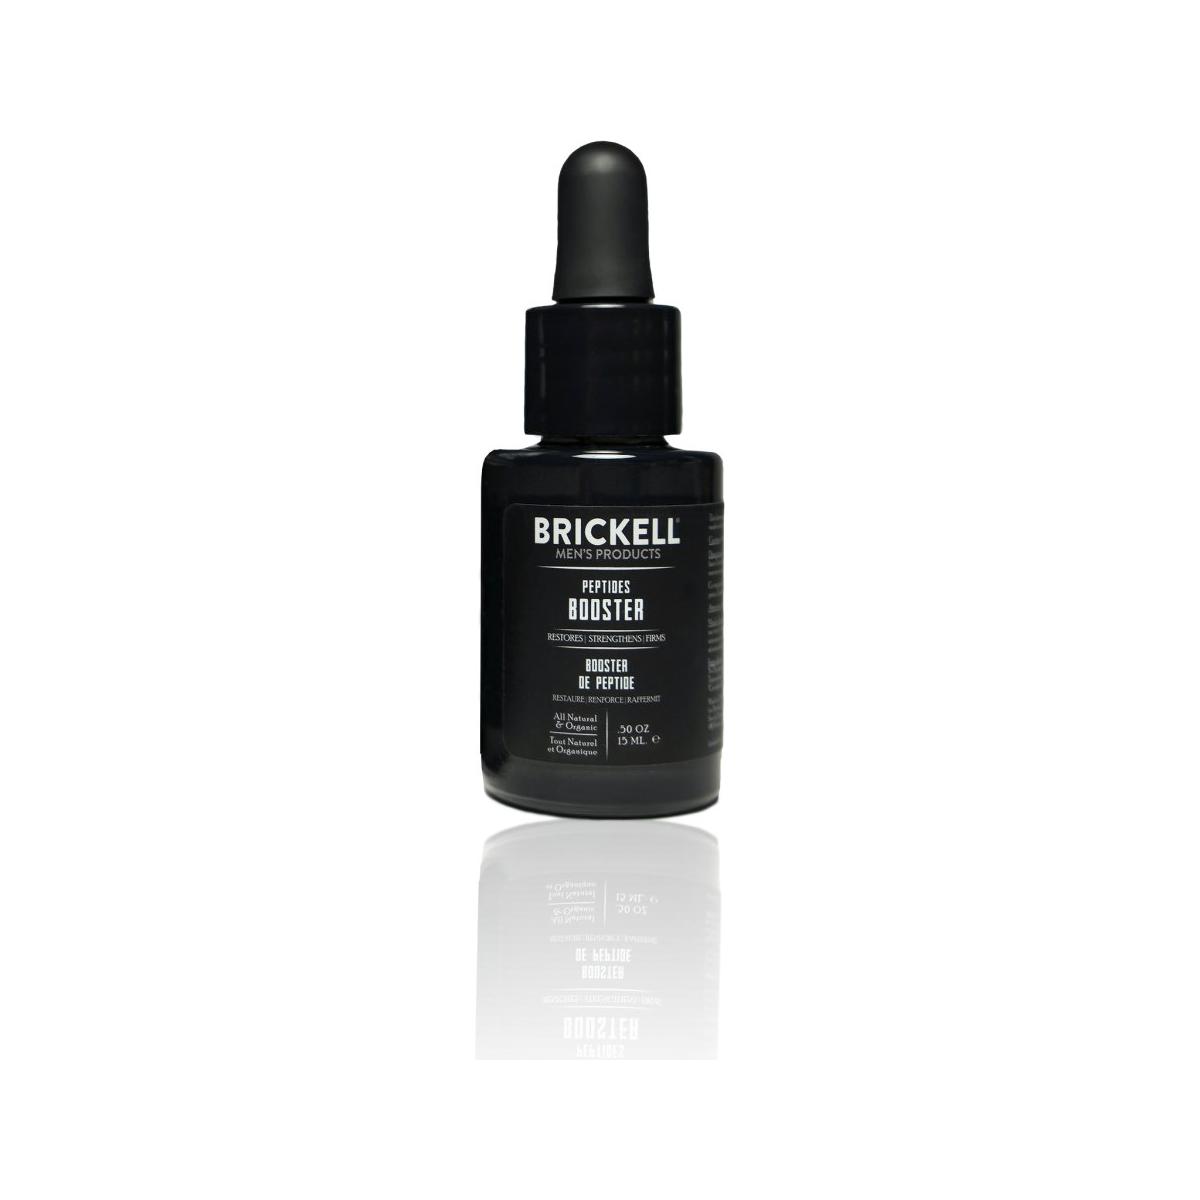 Brickell Protein Peptides Booster - 15ml - Glam Global UK